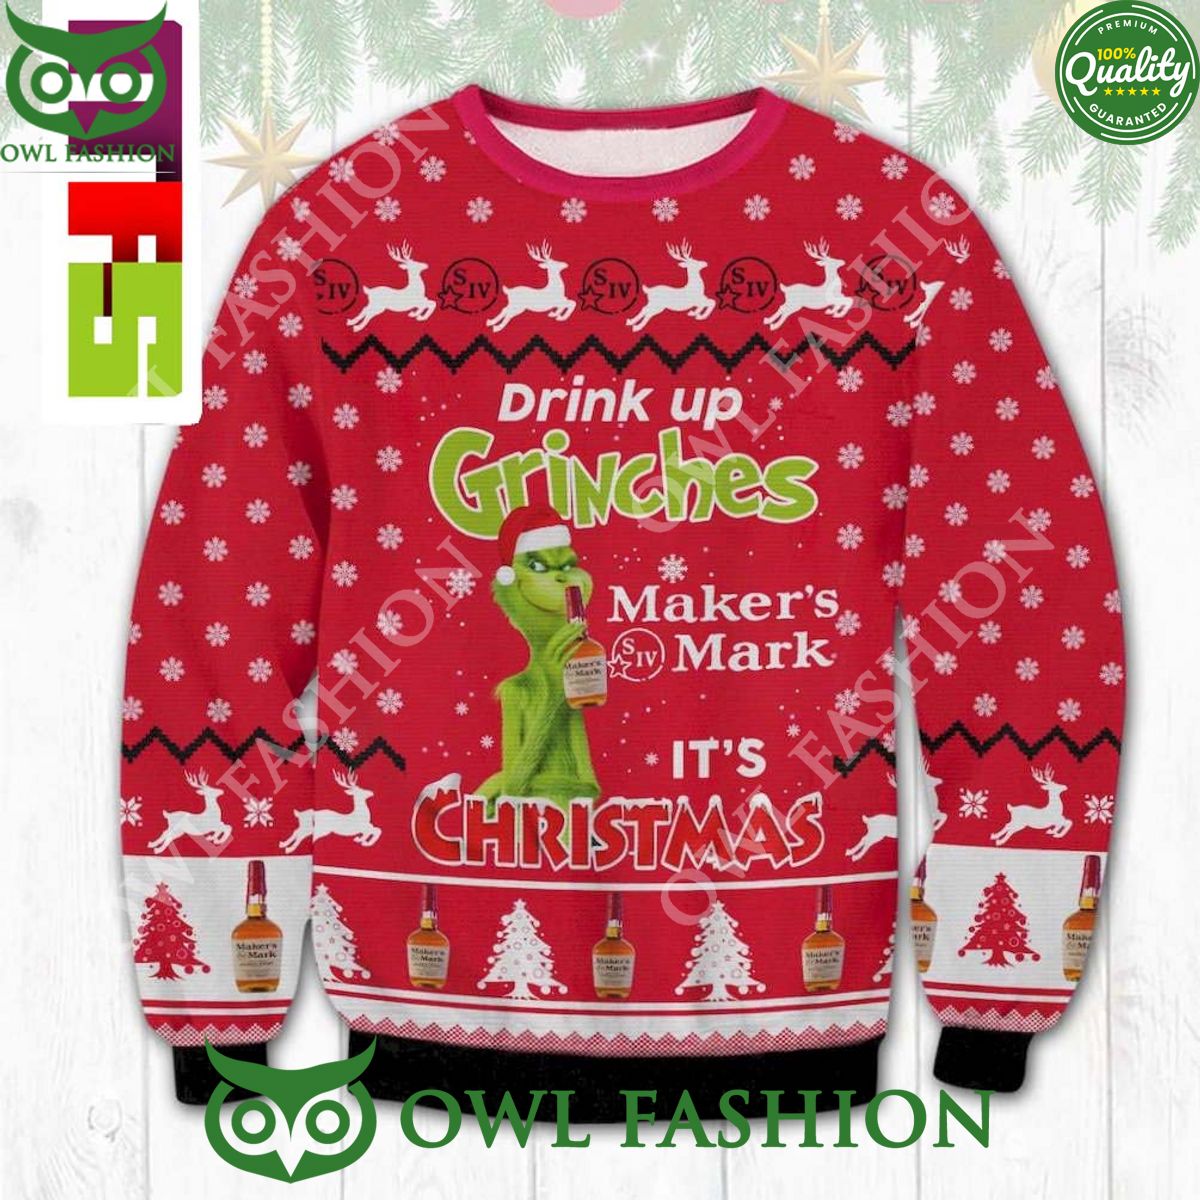 its christmas makers mark drink up grinches xmas ugly sweater 2023 1 Rs47x.jpg